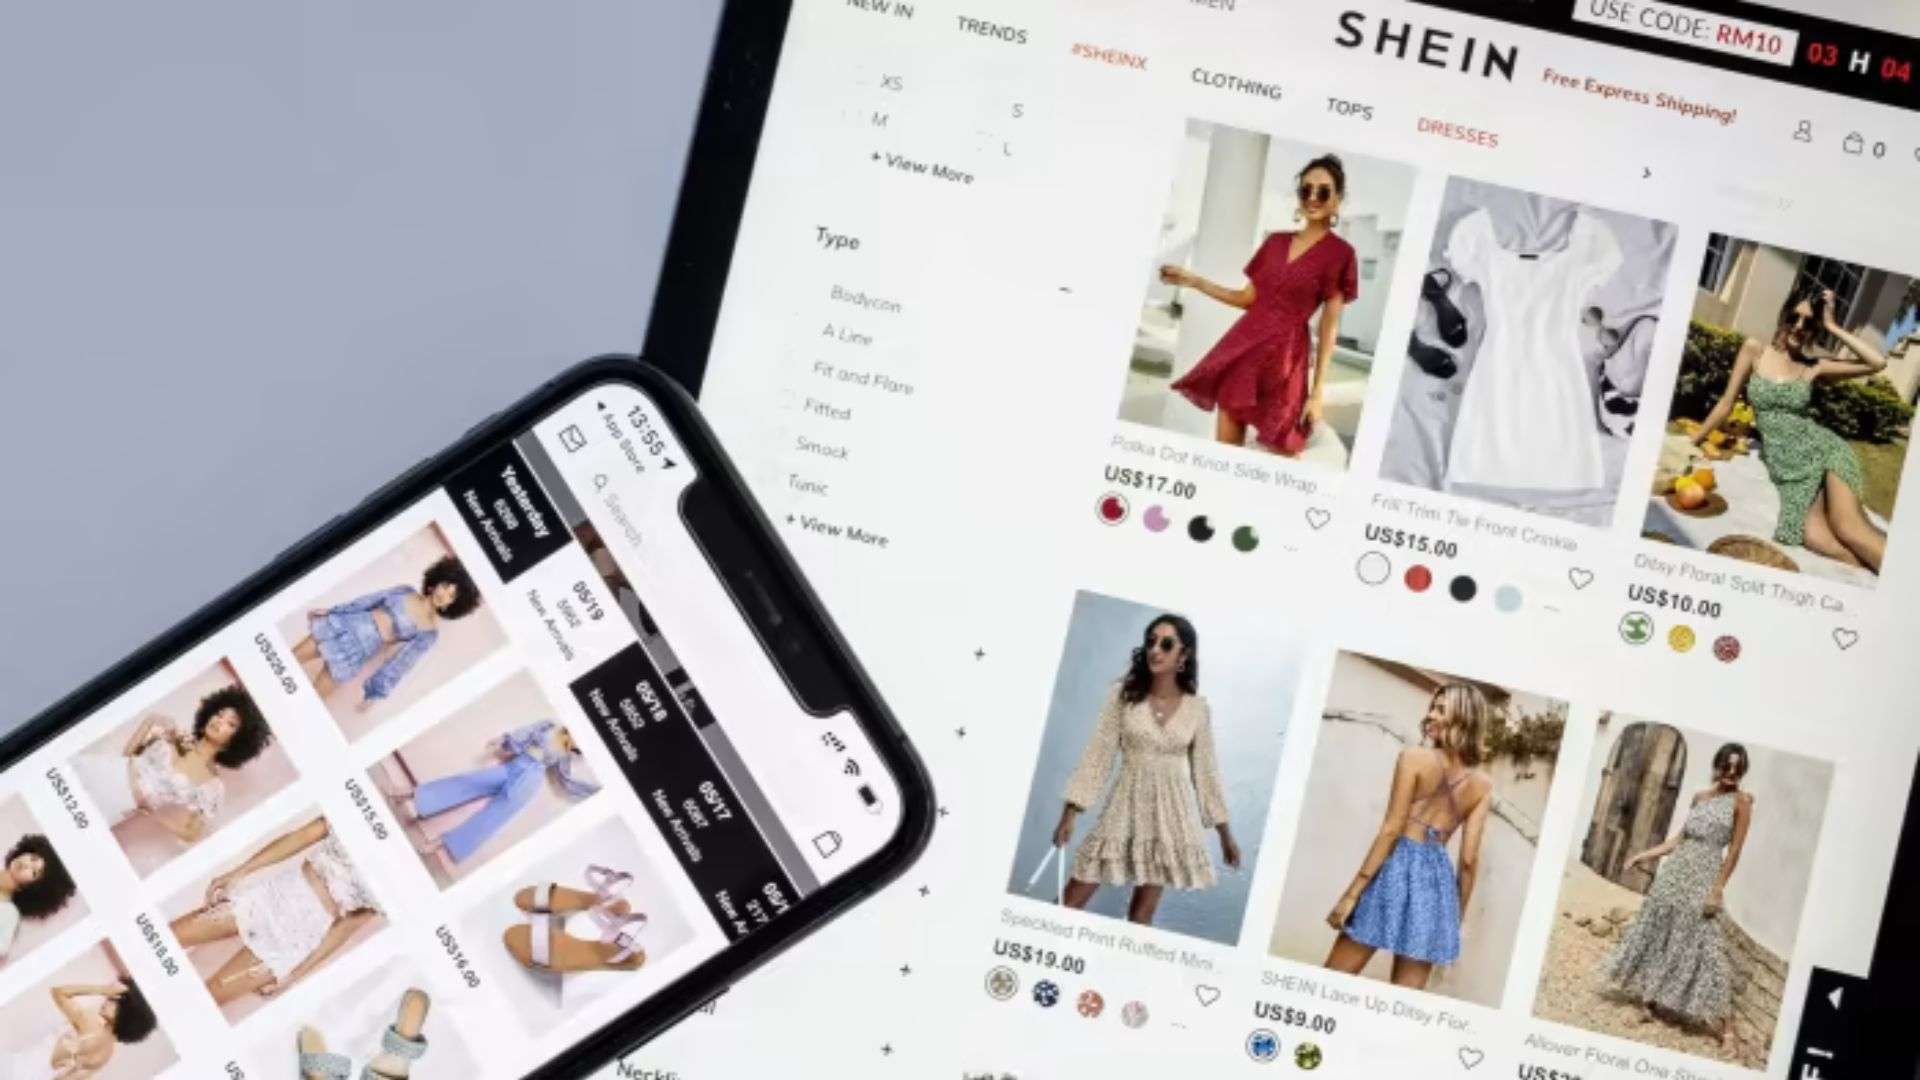 How to Contact Shein Customer Service